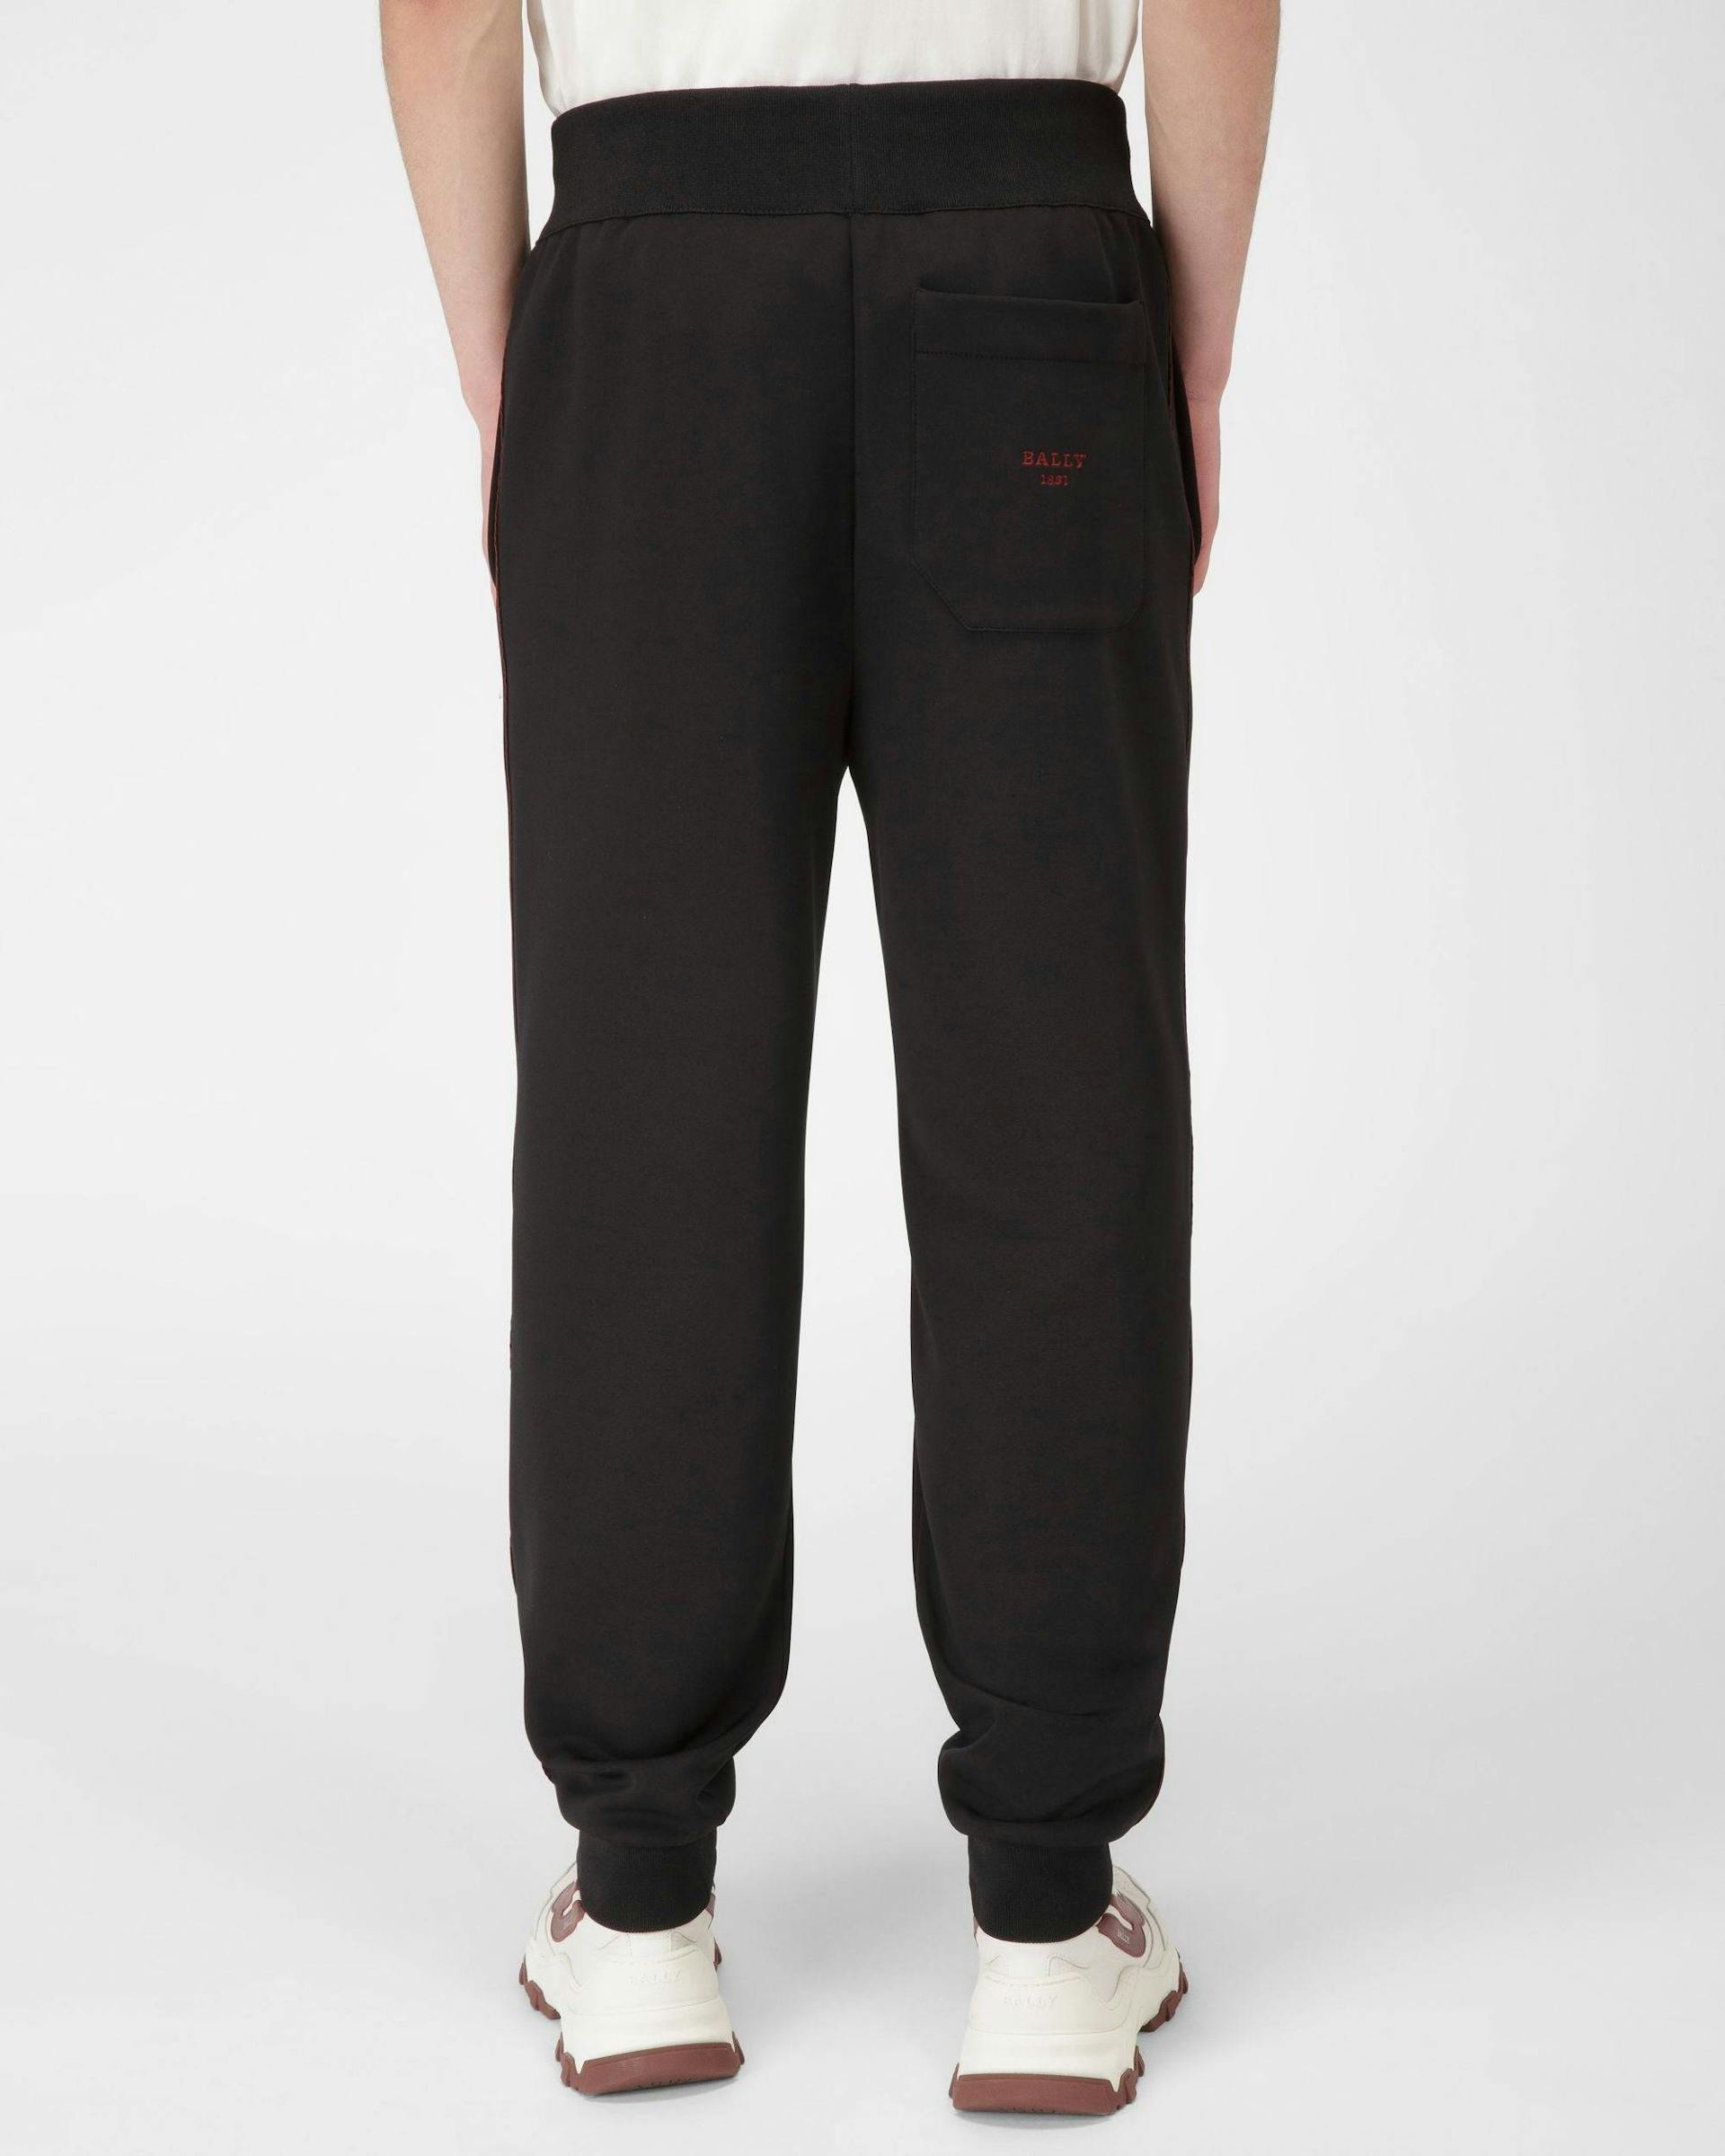 Polyester Mix Sweatpants In Black - Men's - Bally - 03